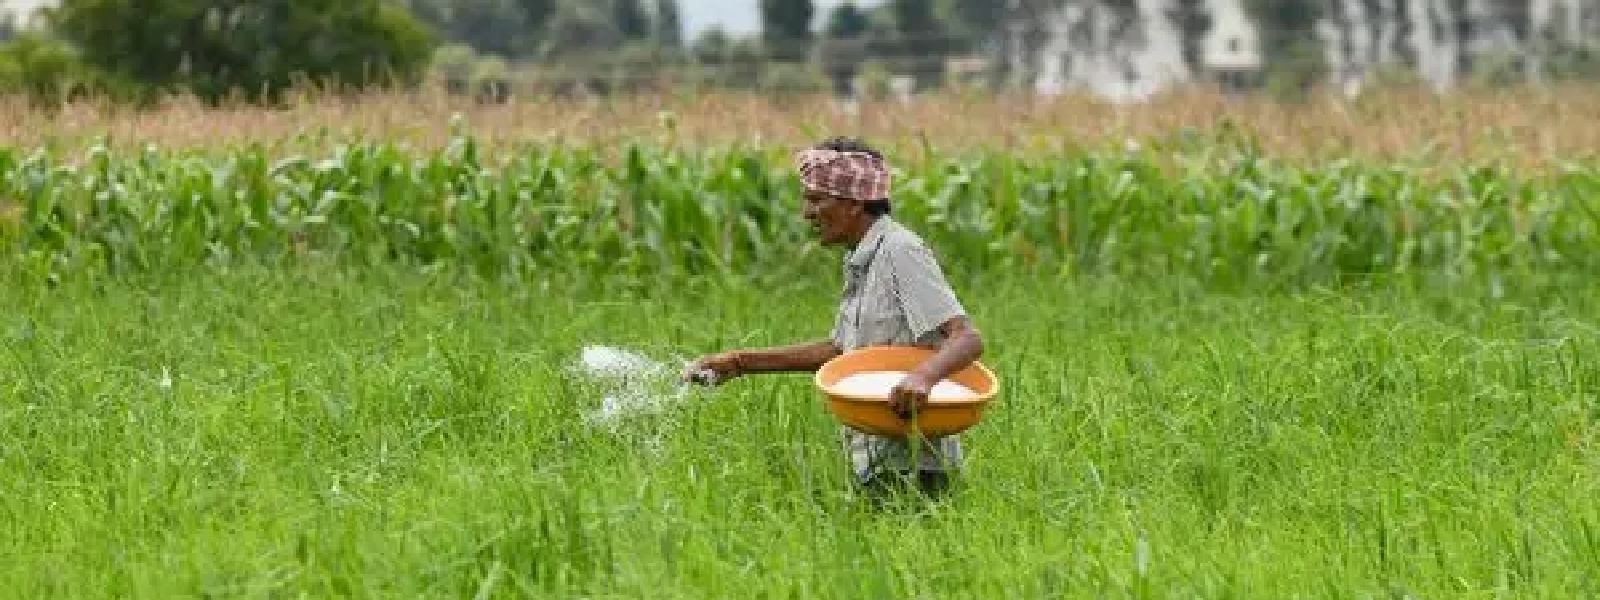 Cabinet nod for USD 55 Mn loan from India for Urea Fertilizer